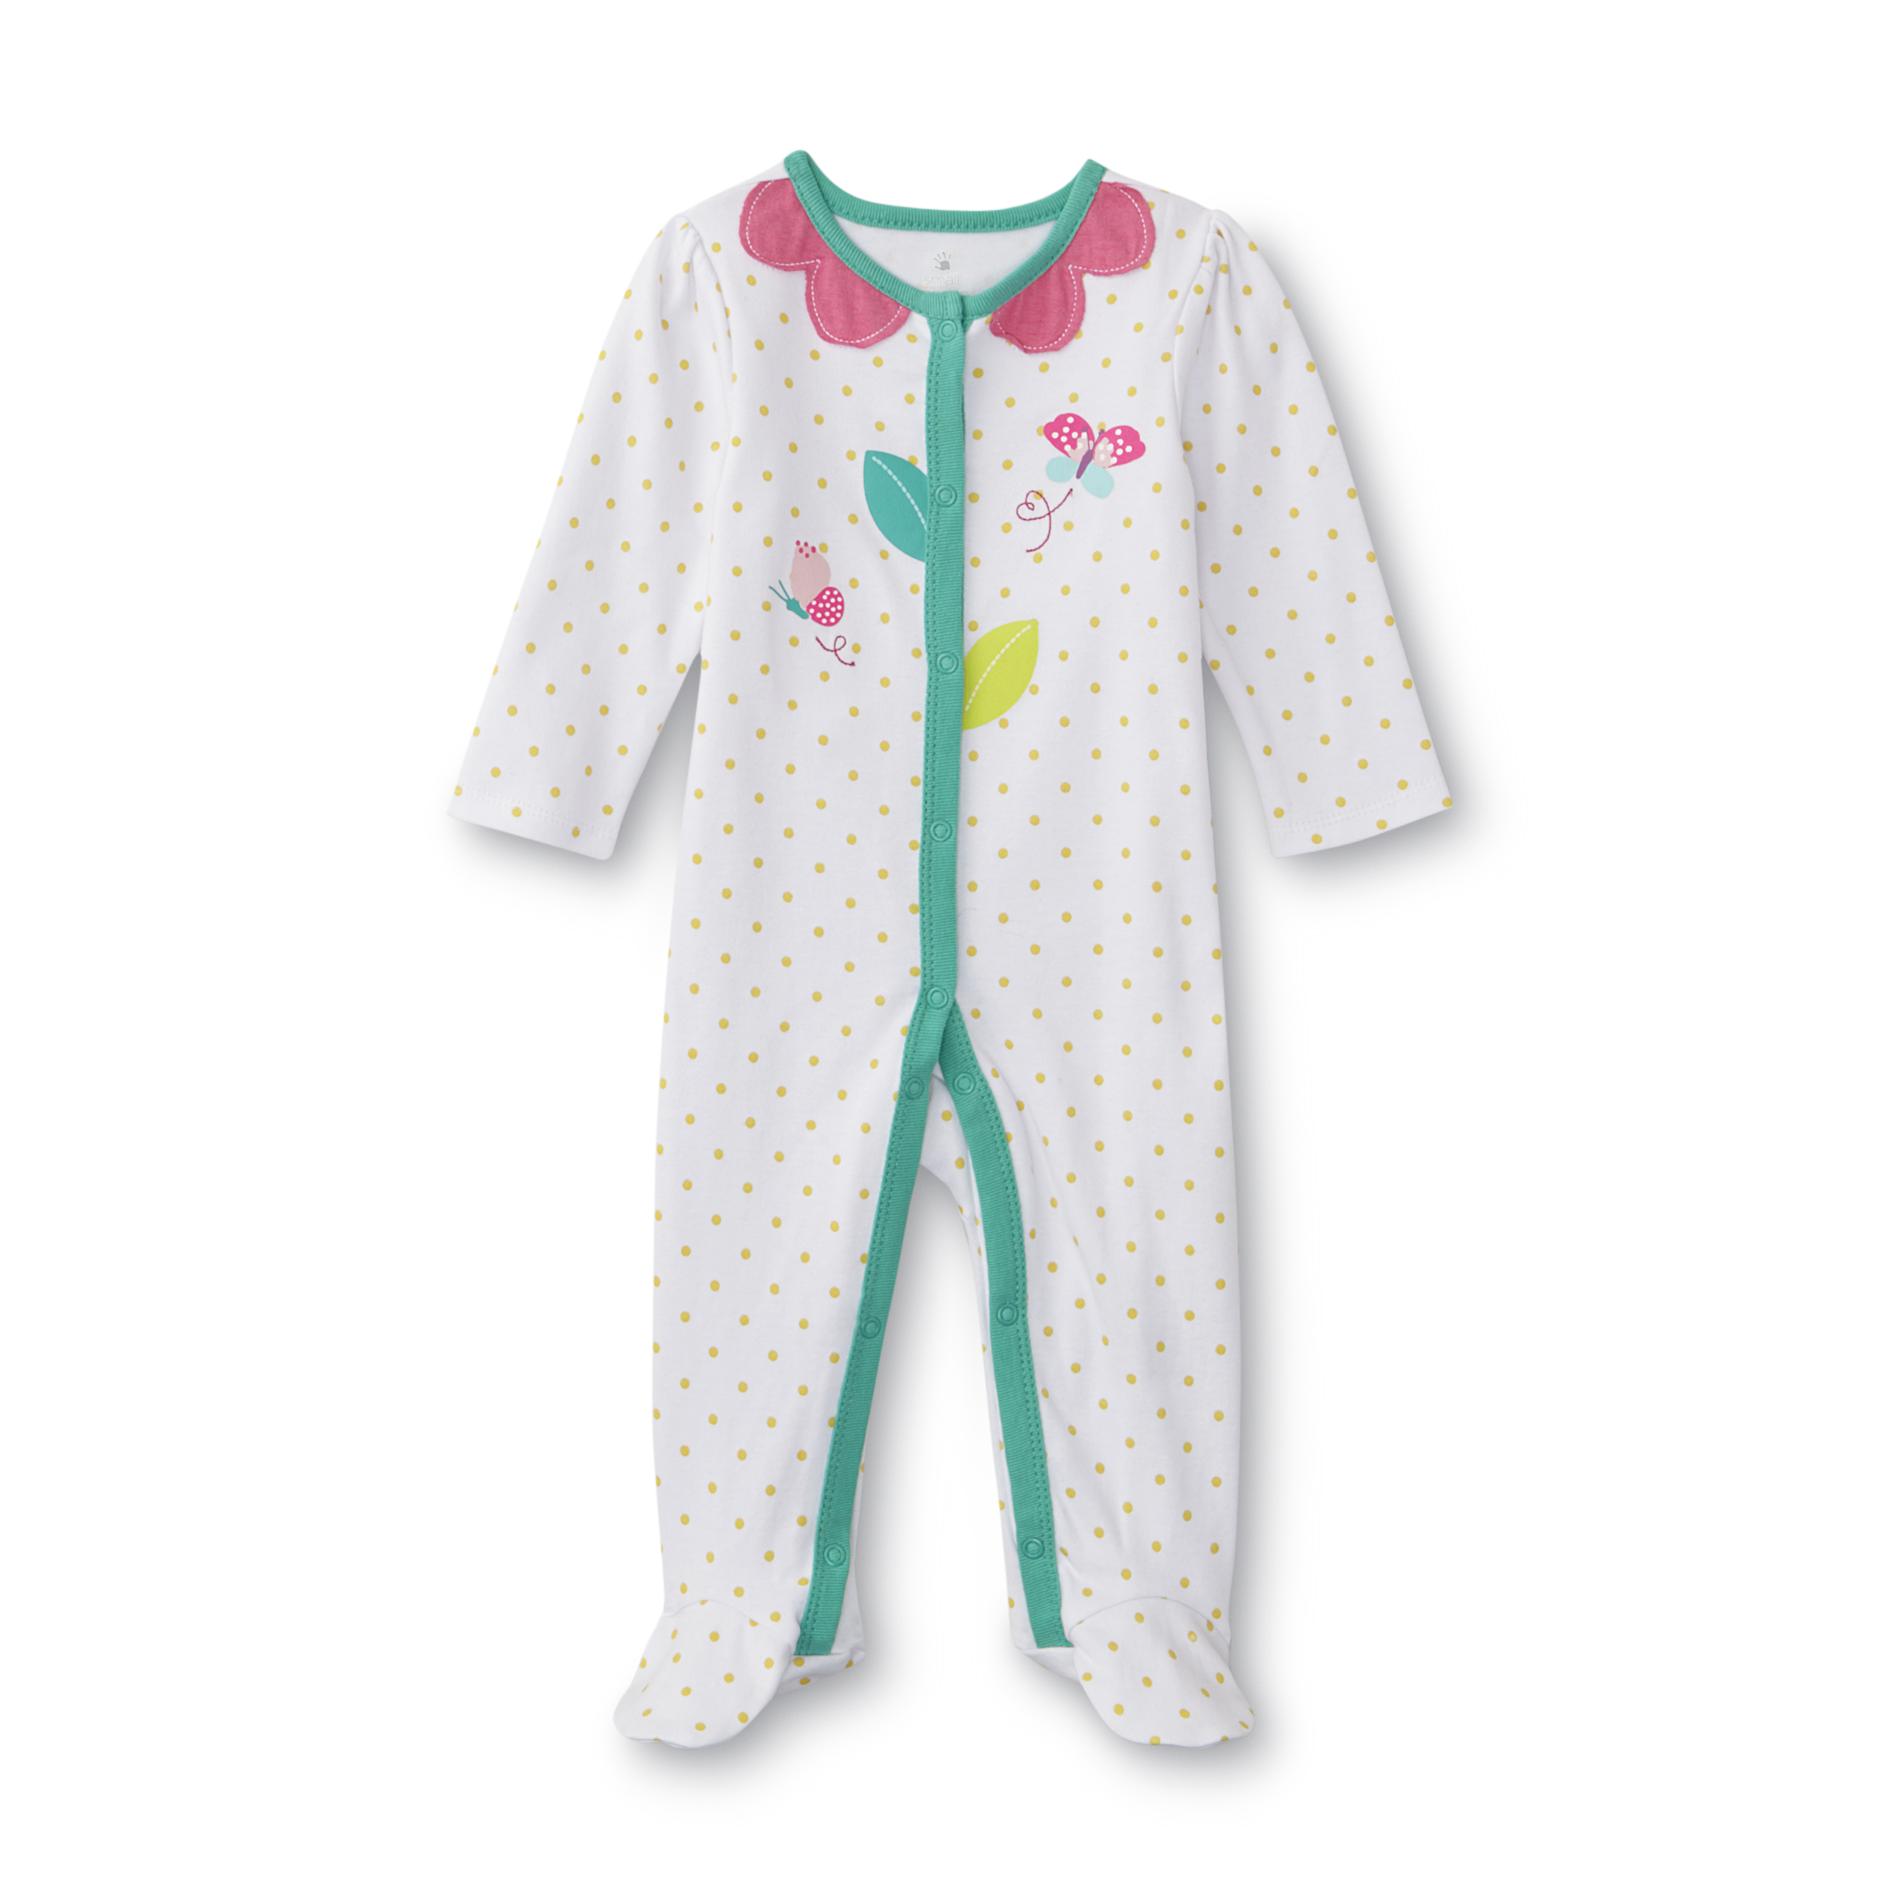 Newborn Girl's Footed Sleeper Pajamas - Dots/Butterfly